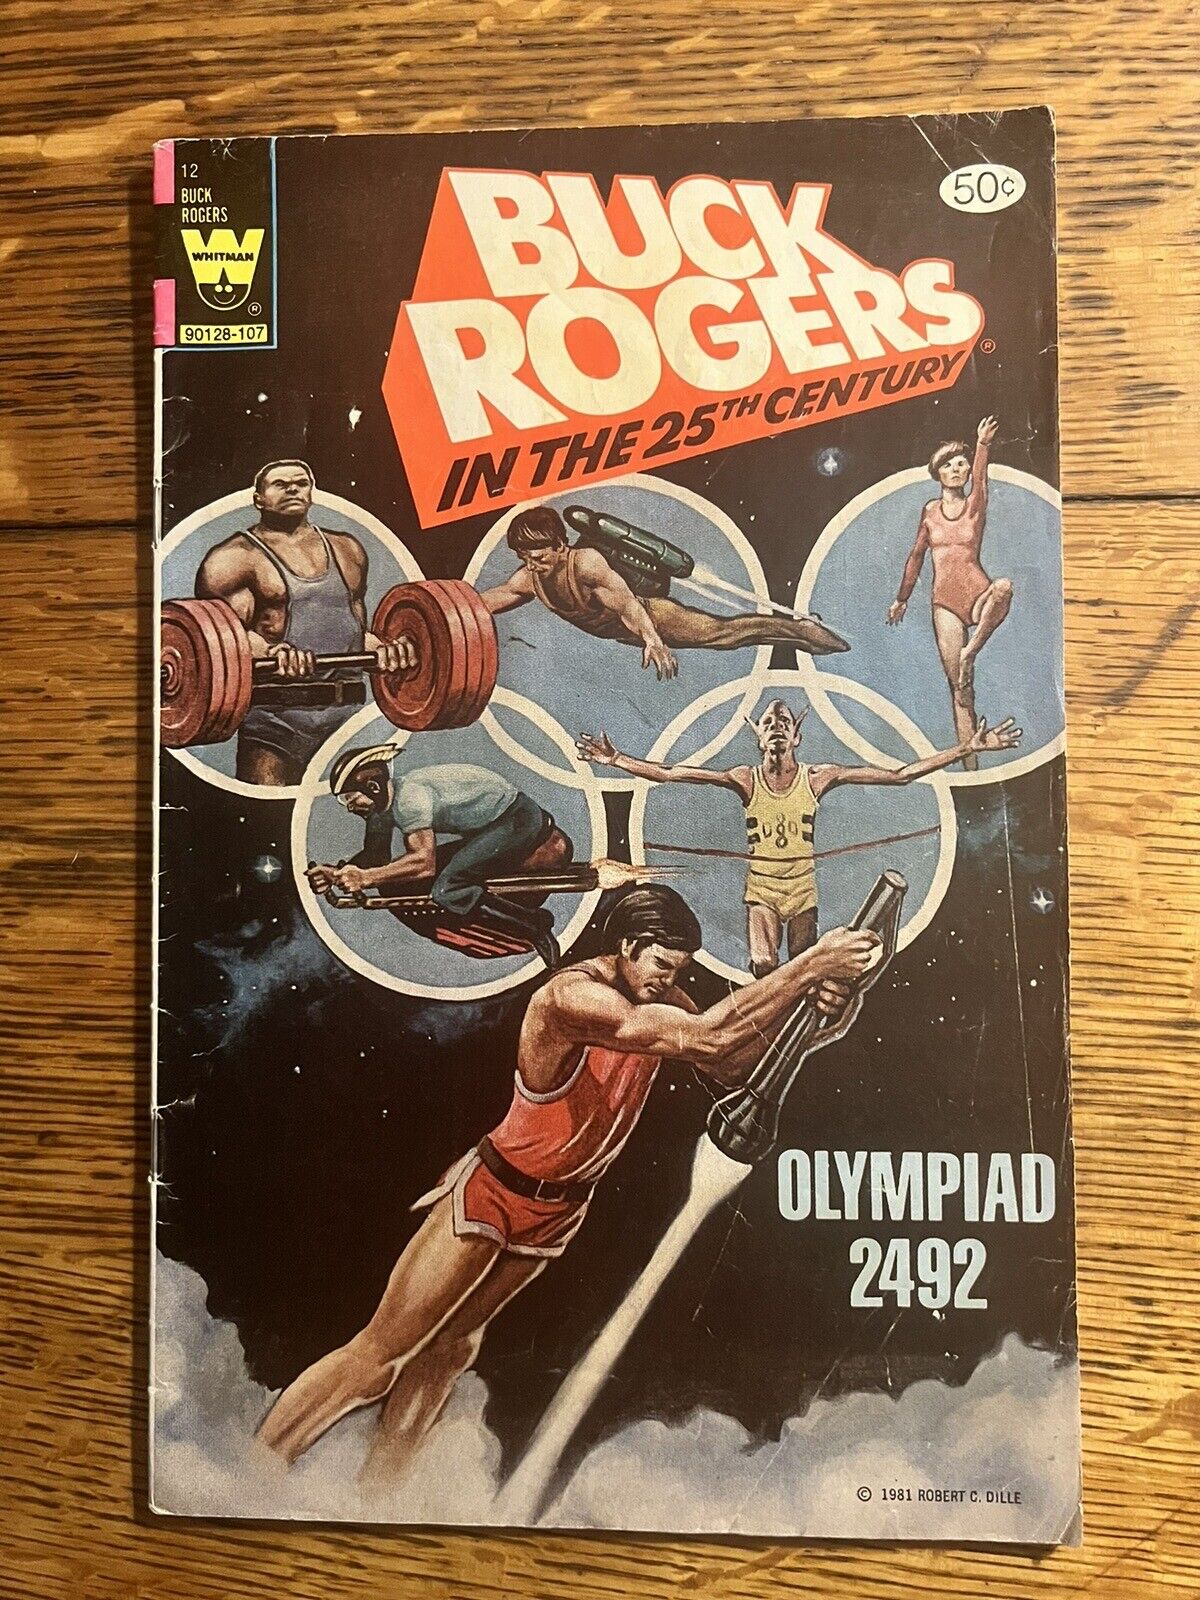 1981 Buck Rogers In The 25th Century No. 12 Olympiad 2492